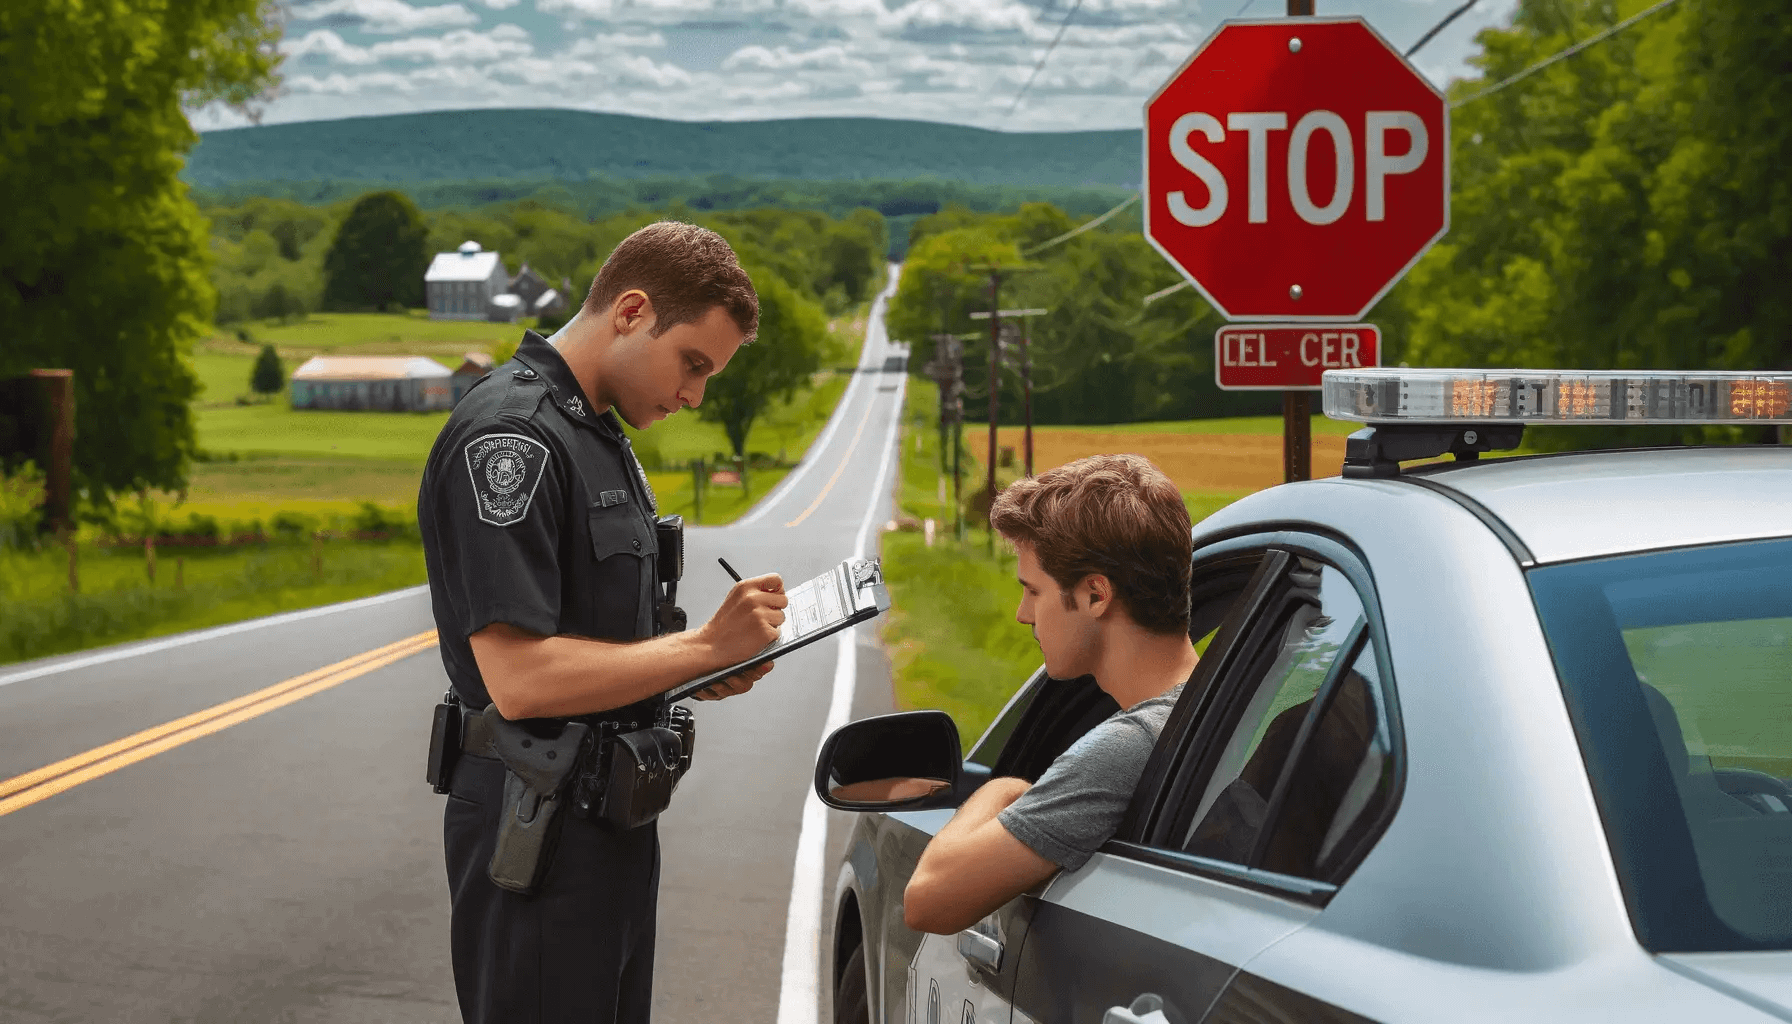 Police officer writing a ticket for running a stop sign in Litchfield County, CT